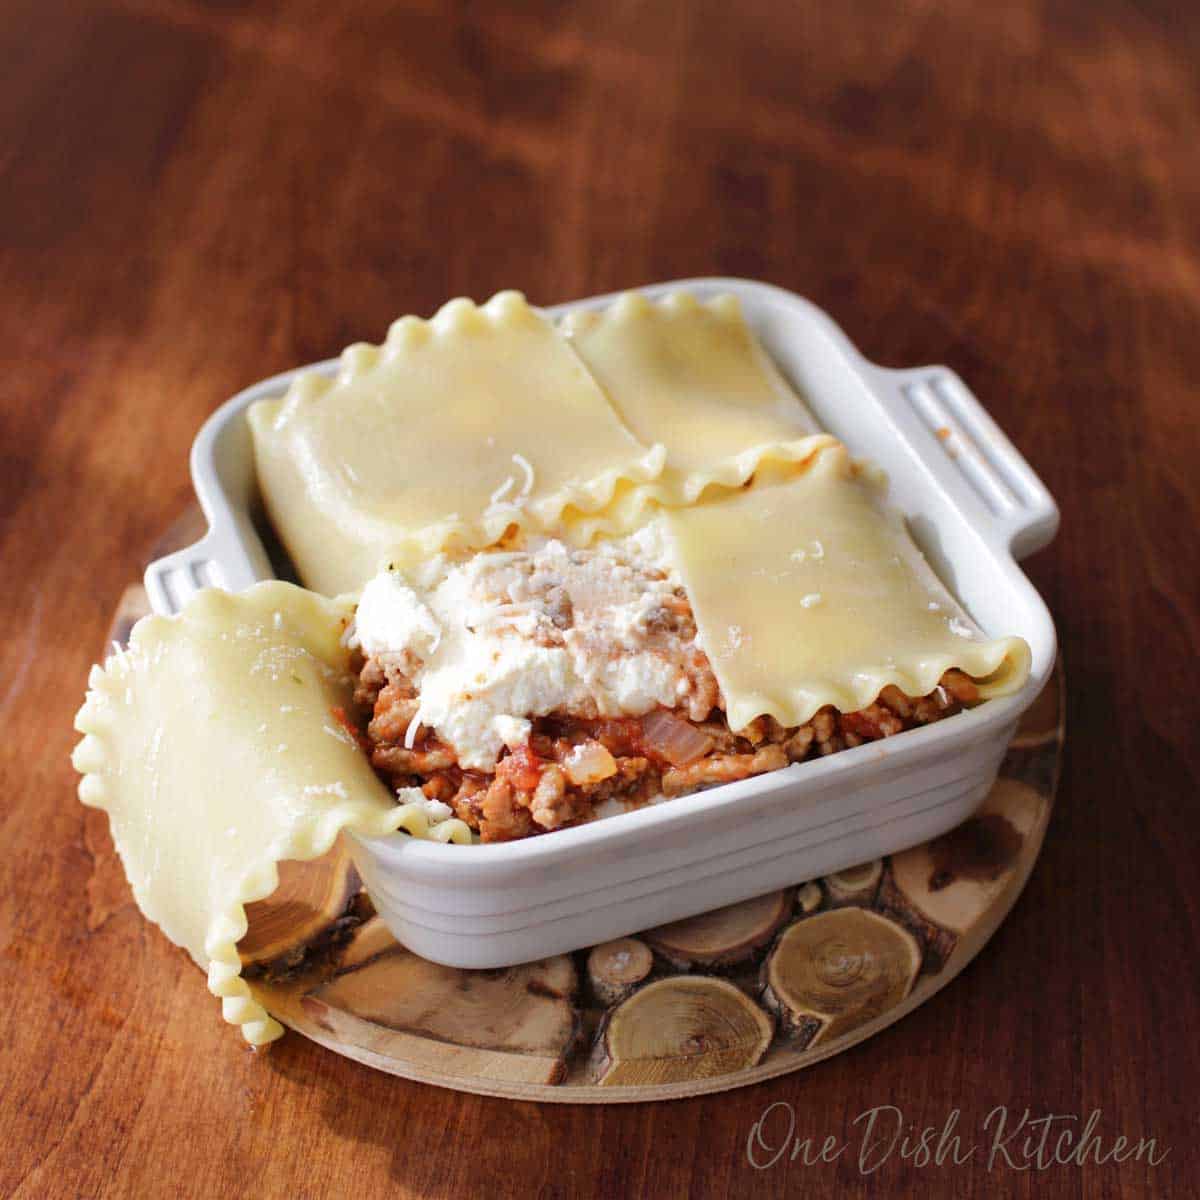 Adding the meat filling to a mini lasagna and folding the noodles over the mixture.